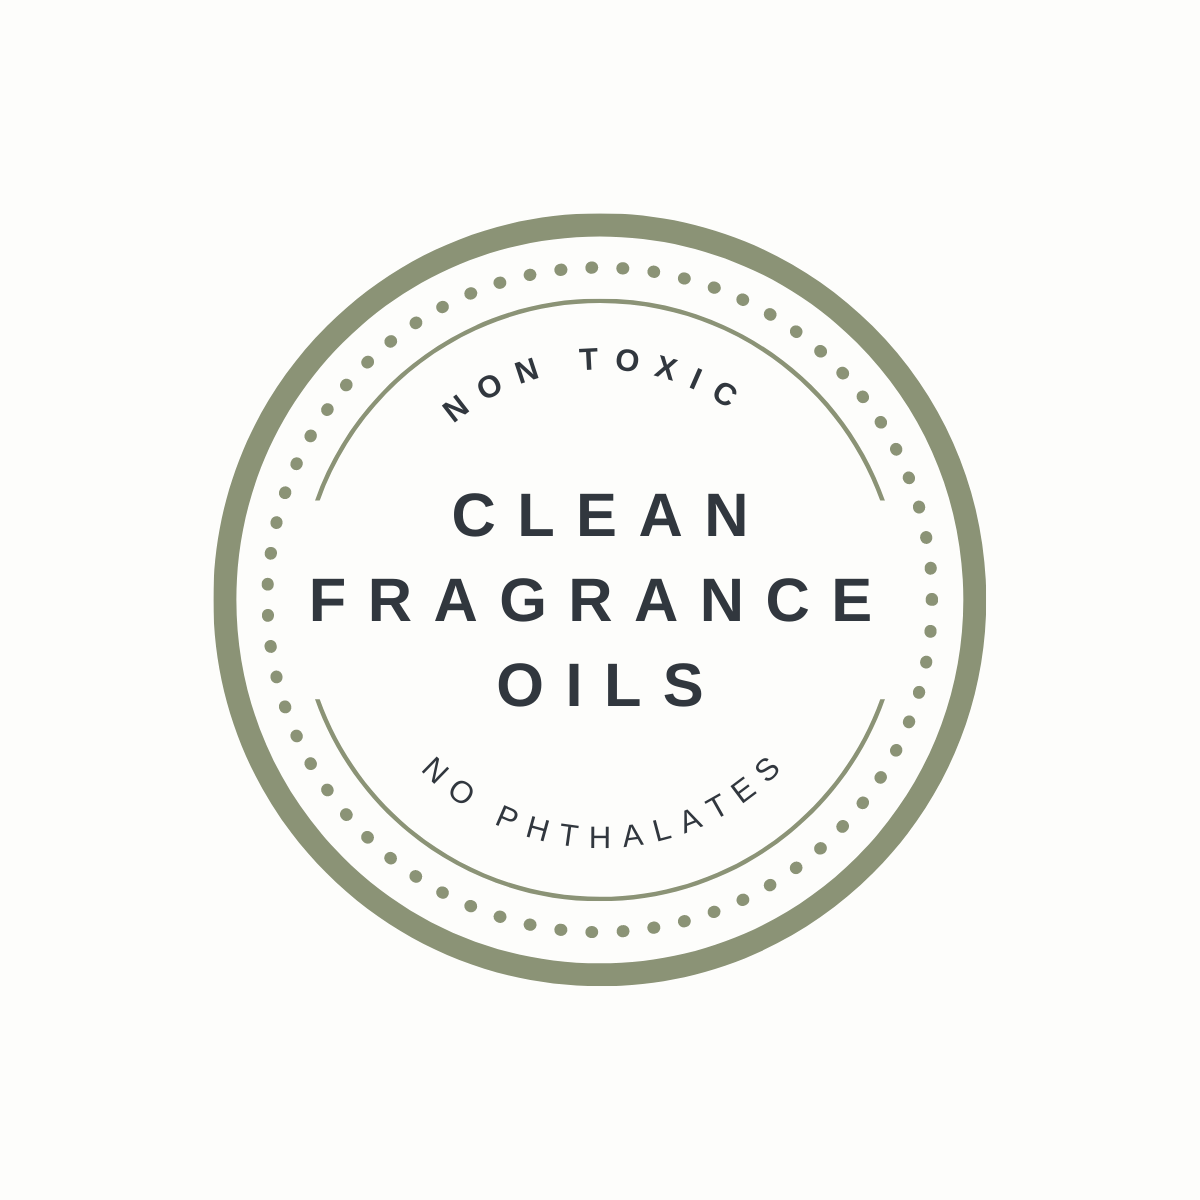 Carefully Sourced, High Quality, Clean Fragrance Oils